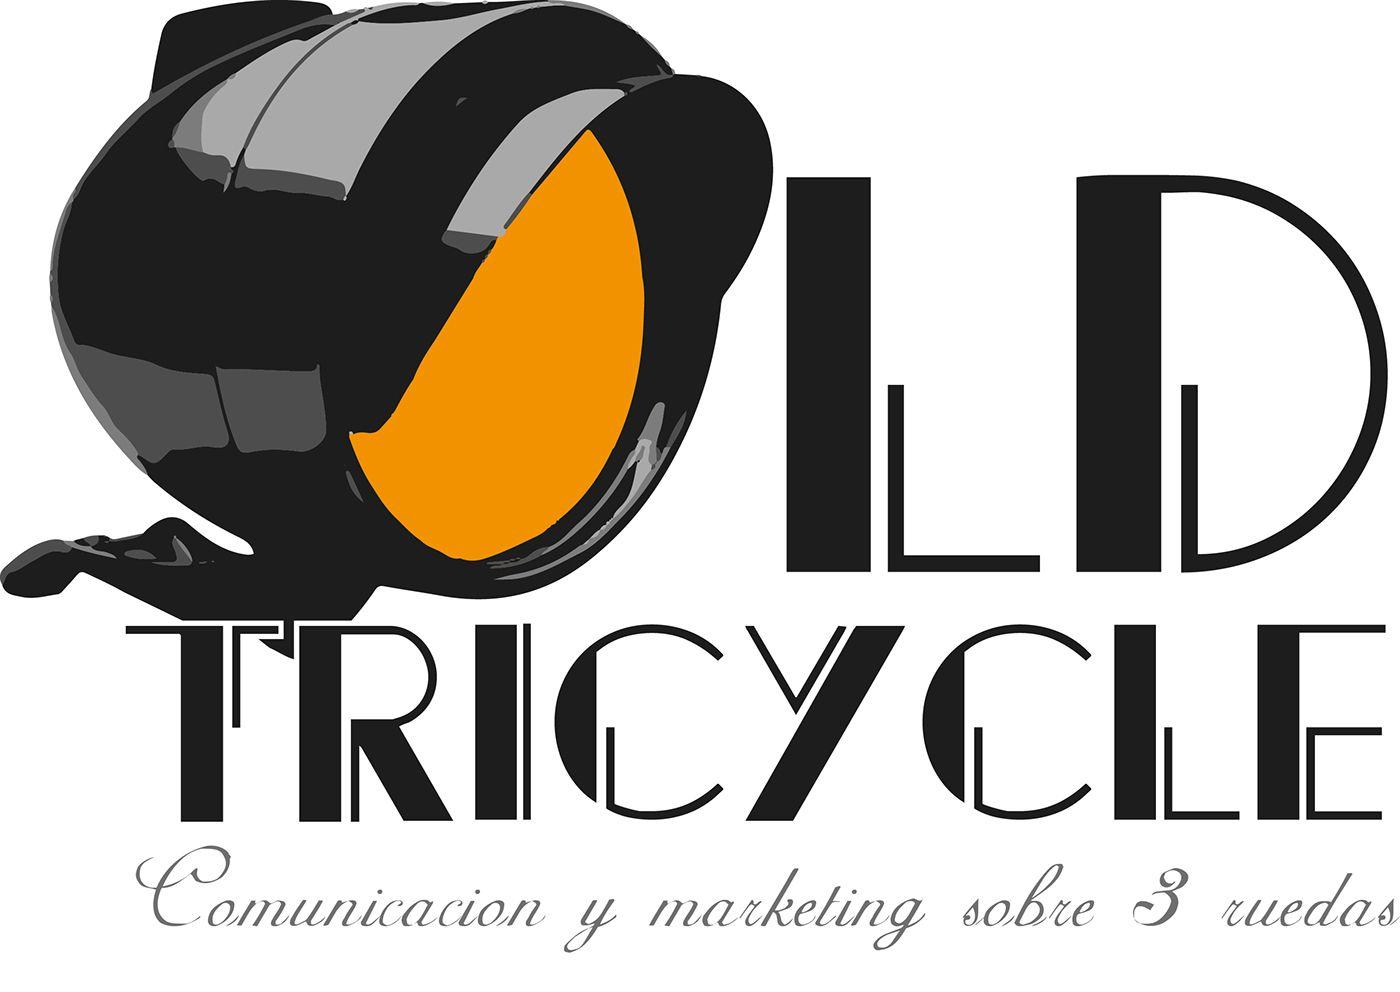 Tricycle Logo - Opciones Logo Old Tricycle on Behance